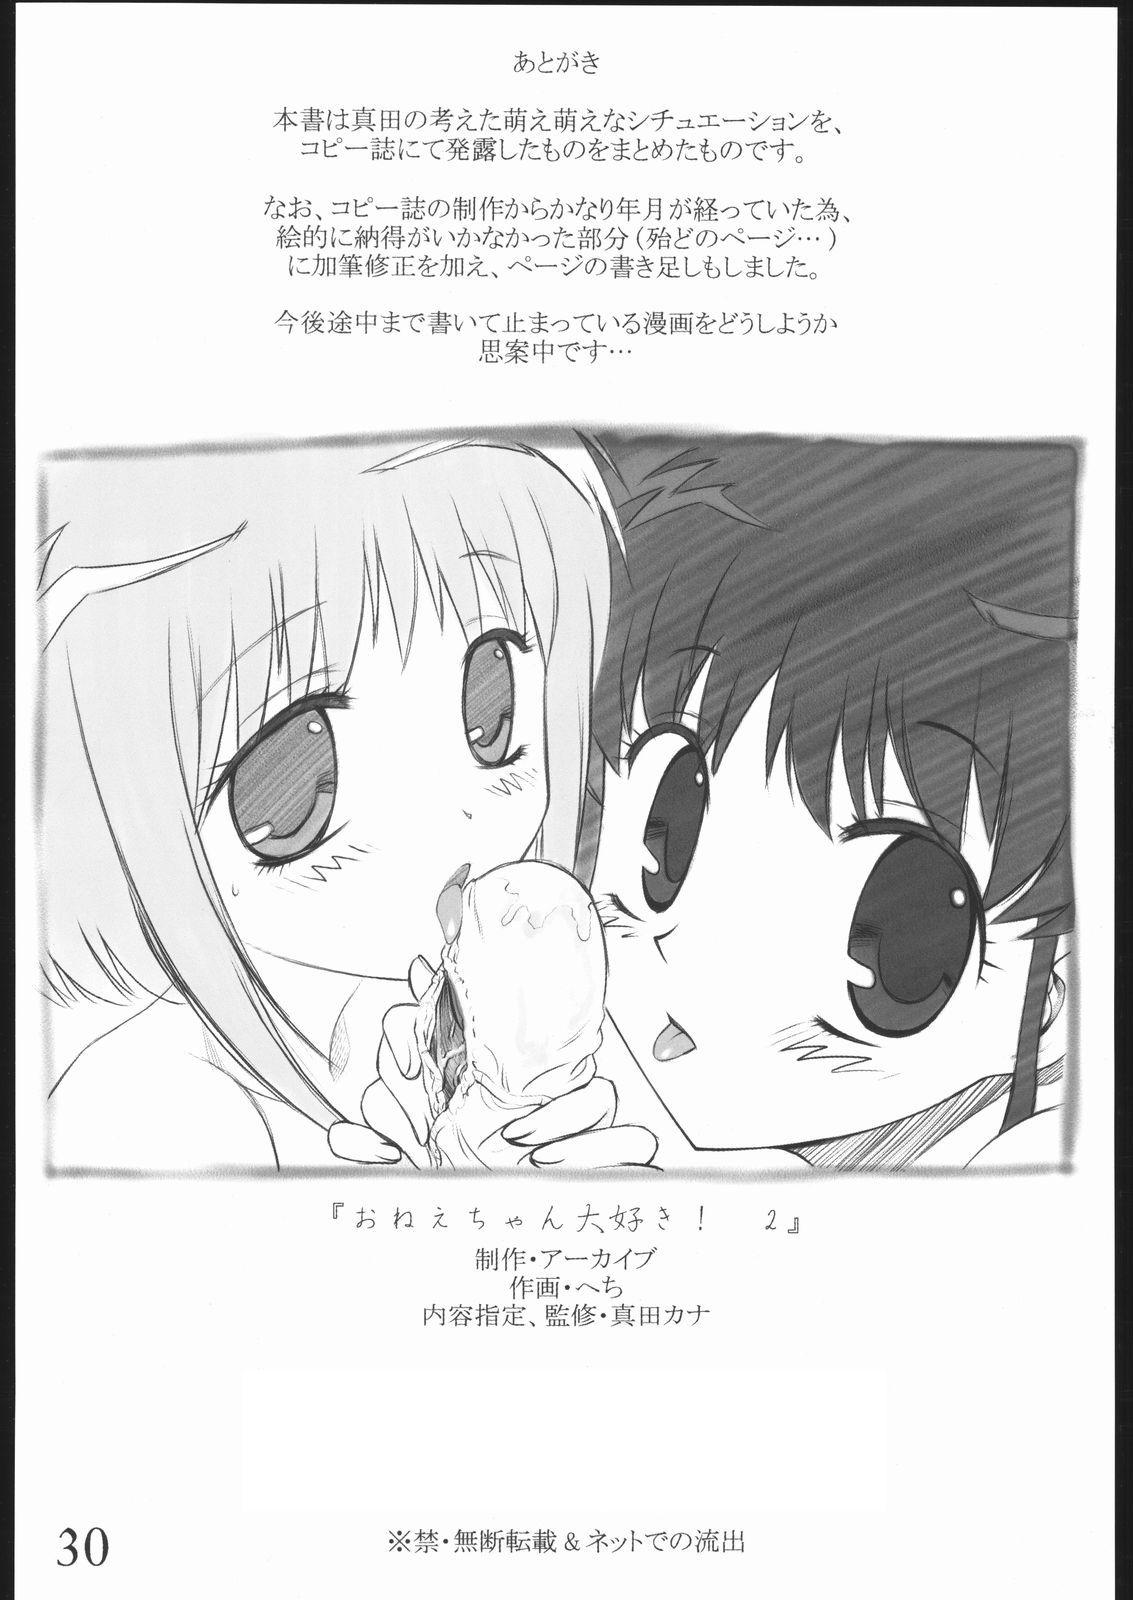 Submission Oneechan Daisuki! 2 - Fruits basket Skinny - Page 29